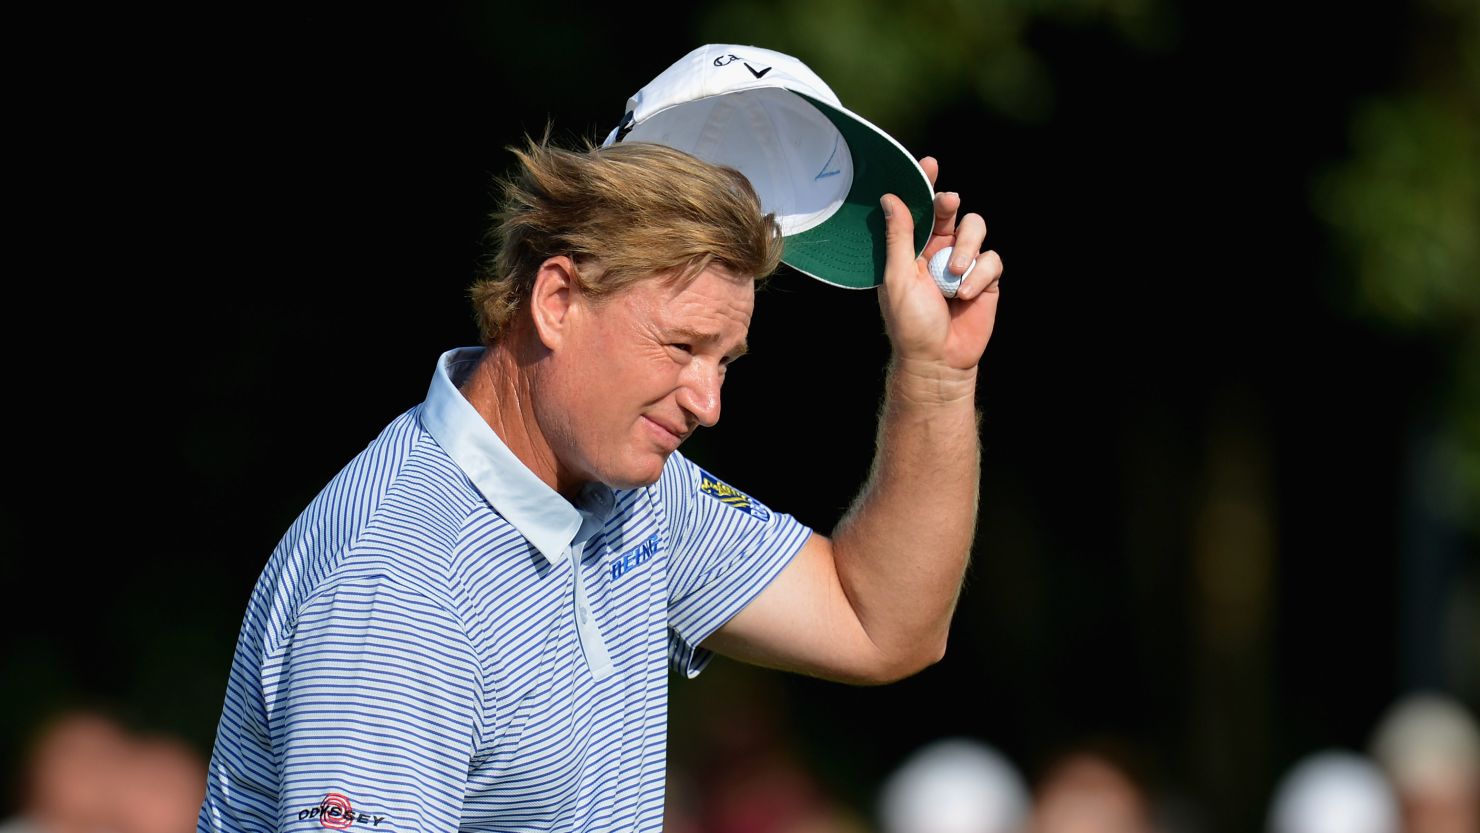 Ernie Els stayed ahead of his rivals with a last hole birdie in the BMW International second round in Munich.